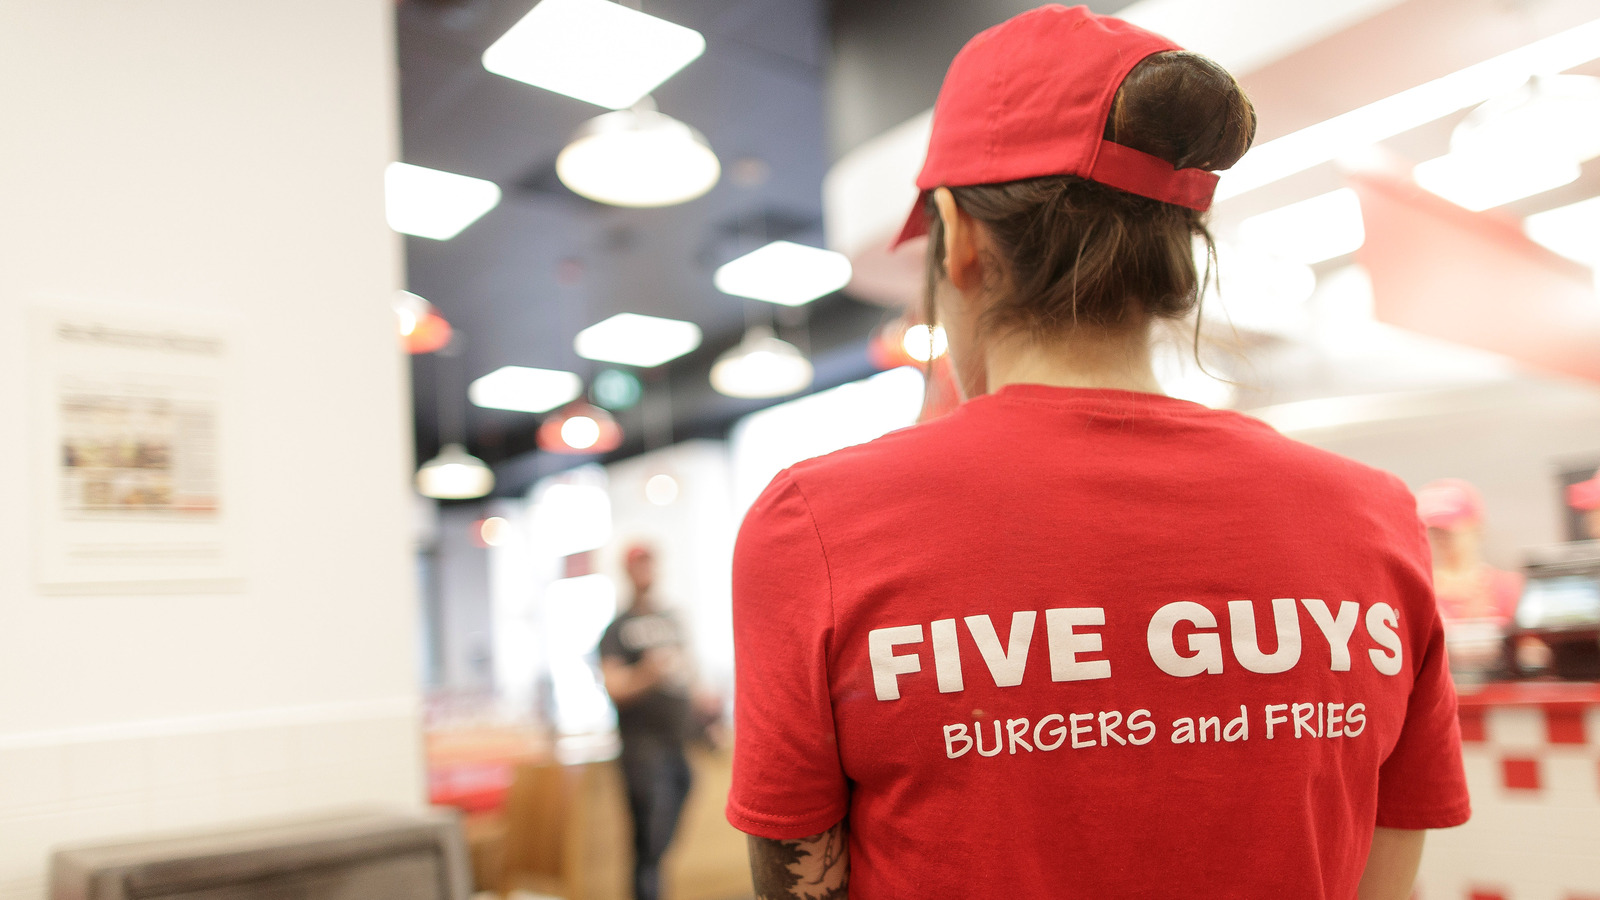 What The Five Guys Uniform Colors Actually Mean